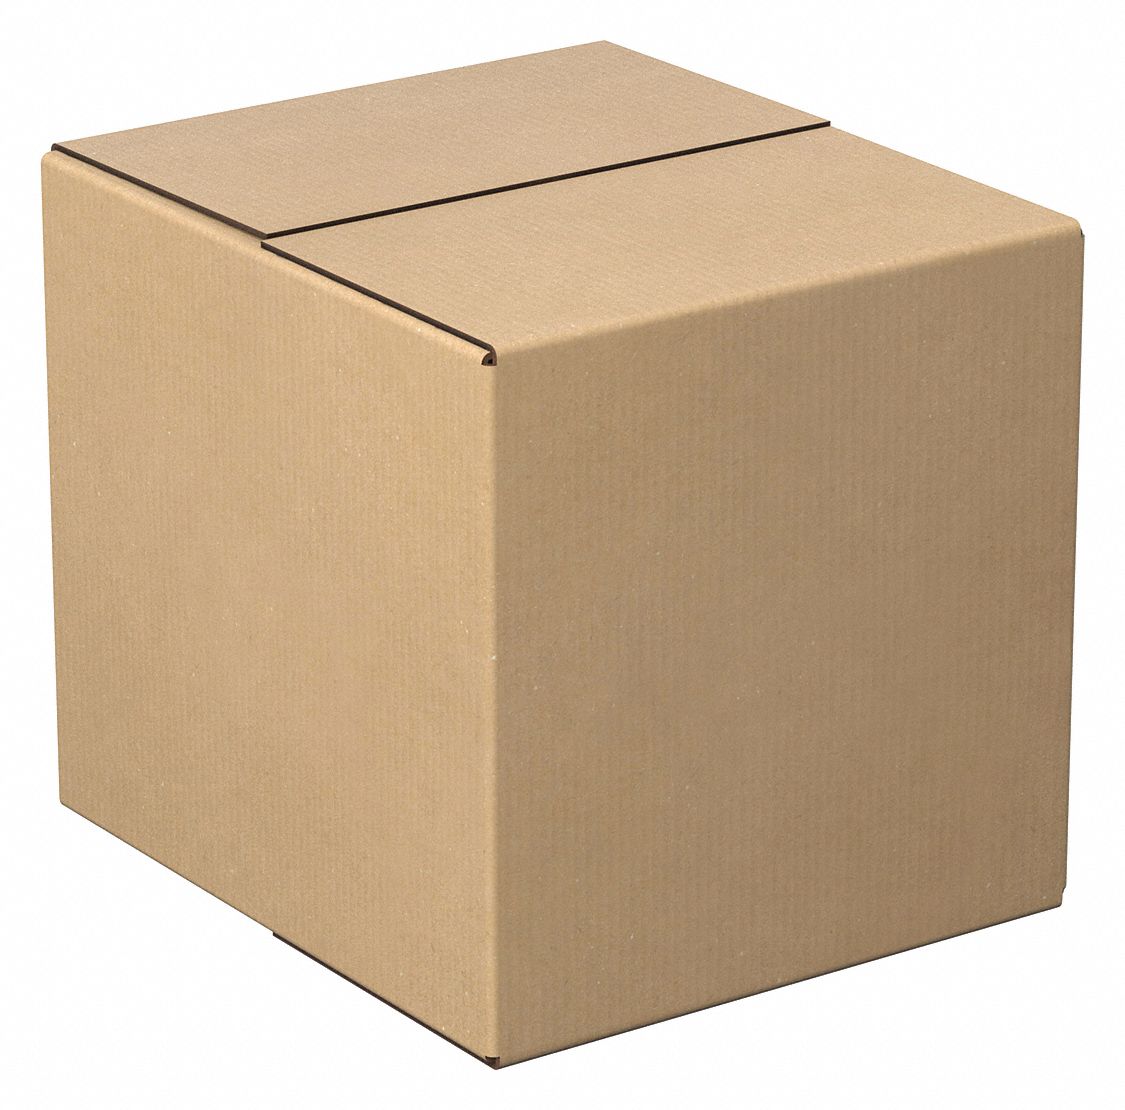 GRAINGER APPROVED Shipping Box, Single Wall, 14x12x12 in Inside LxWxH